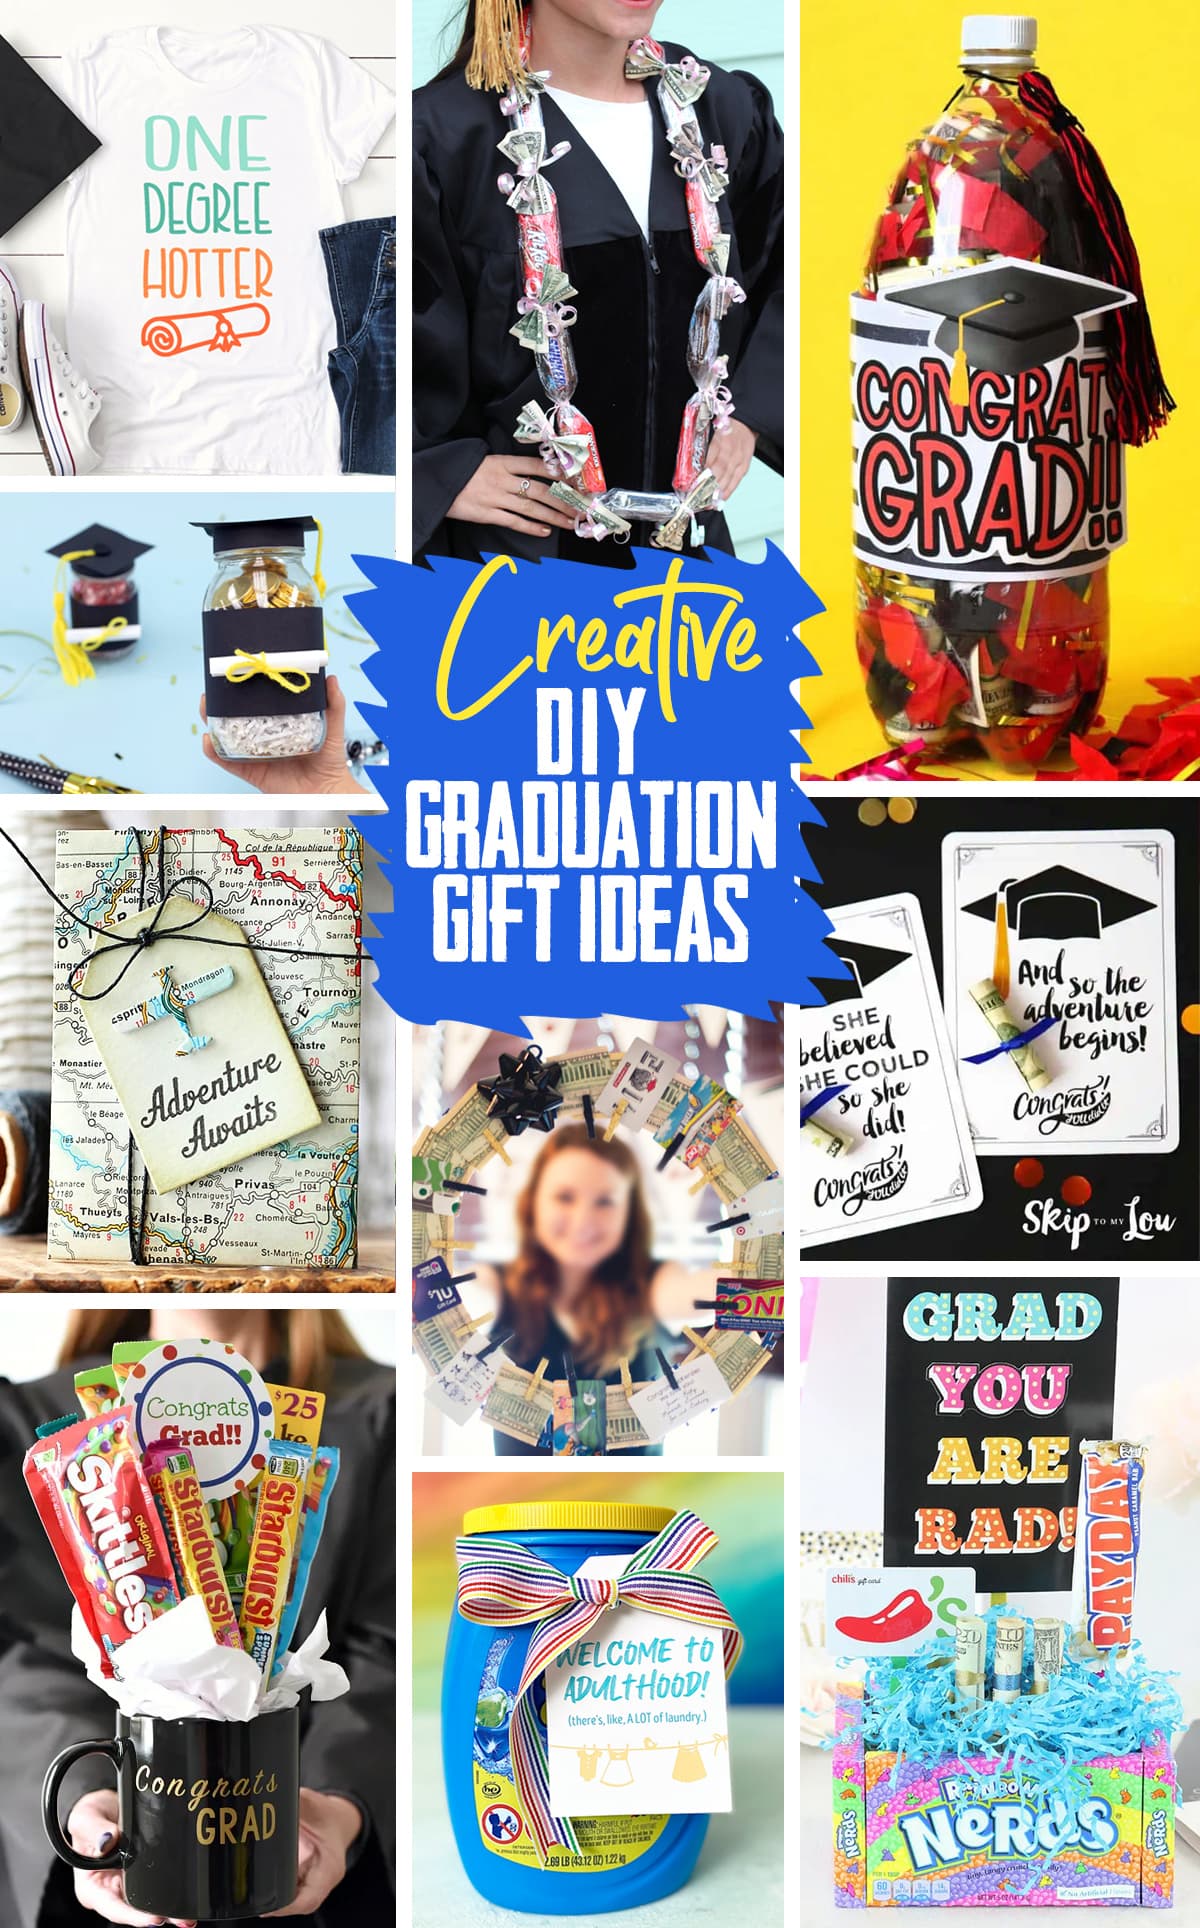 Personalized Graduation Gifts | Personal Creations